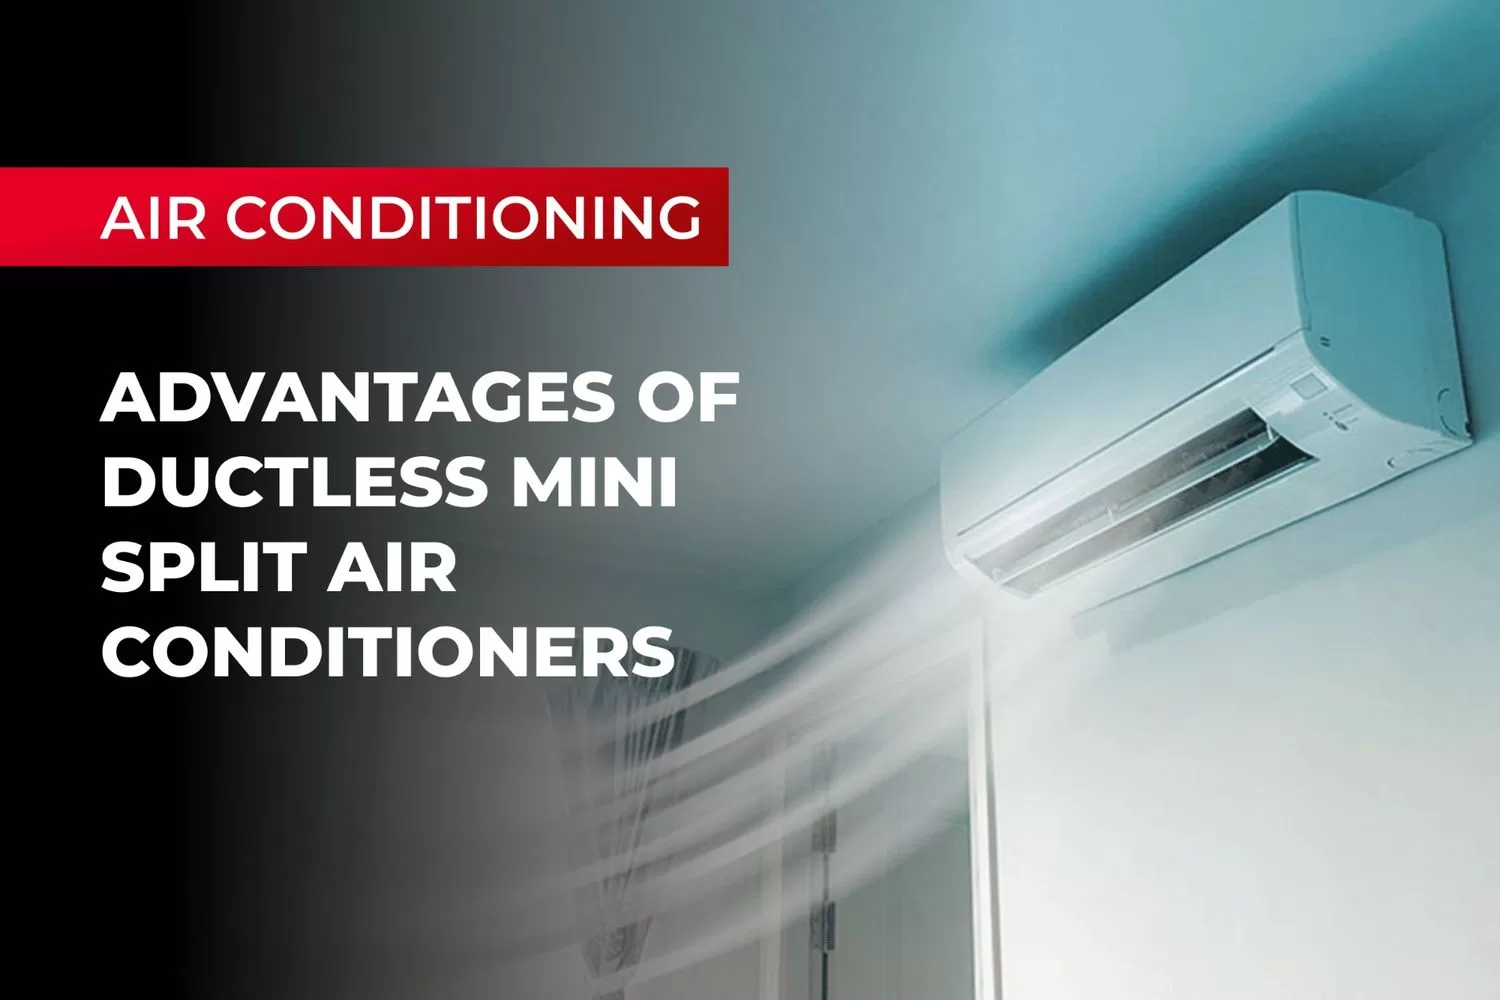 Advantages of Ductless Mini Split Air Conditioners